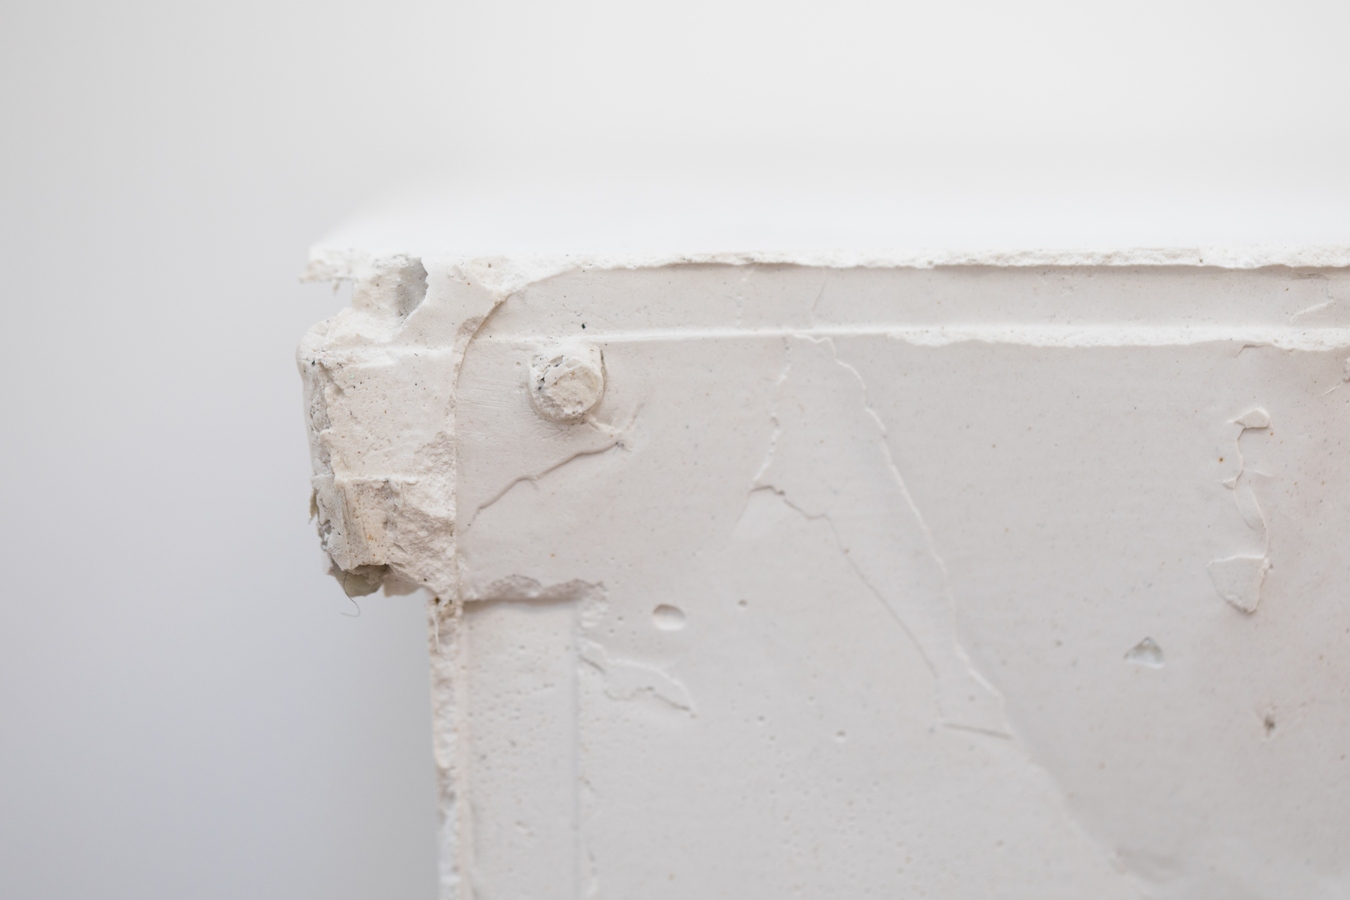 Image: Fiona Connor, Untitled (mailbox) #1-#8 (detail), 2021. Photo: Janneth Gil.